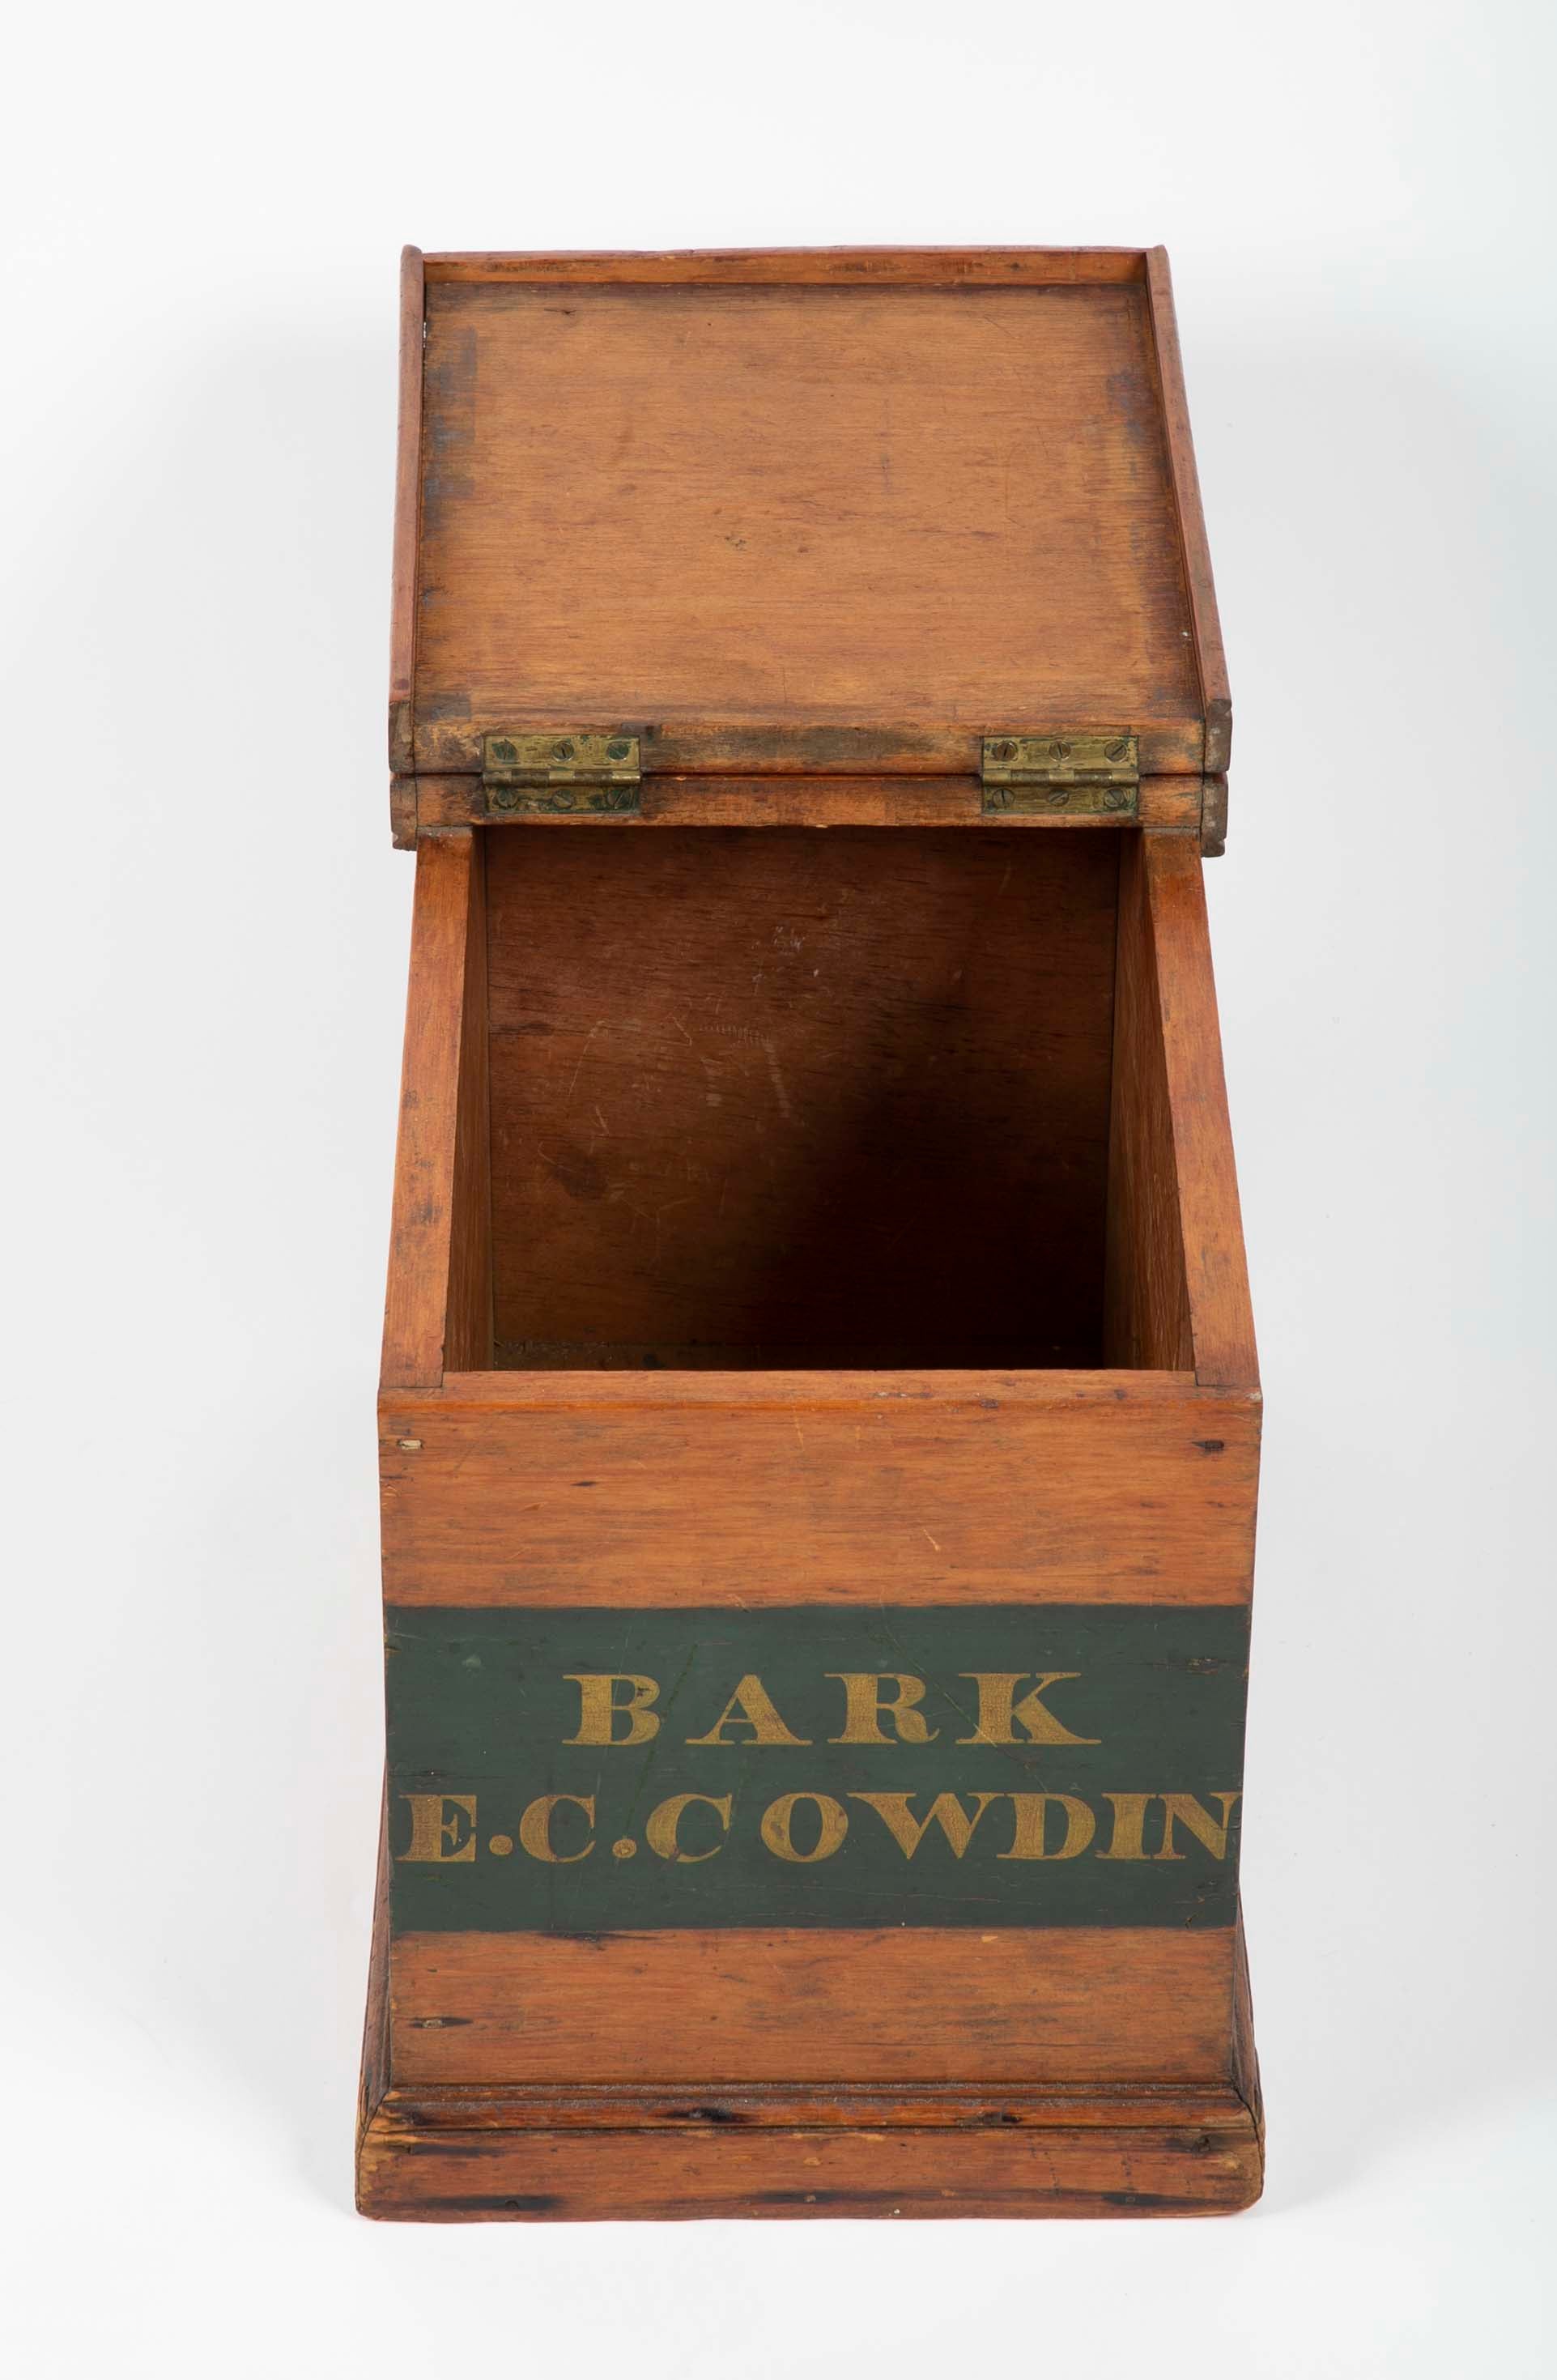 Whale Ship Agent's Document Box from the Whaling Bark "E. C. Cowdin" / Side Table